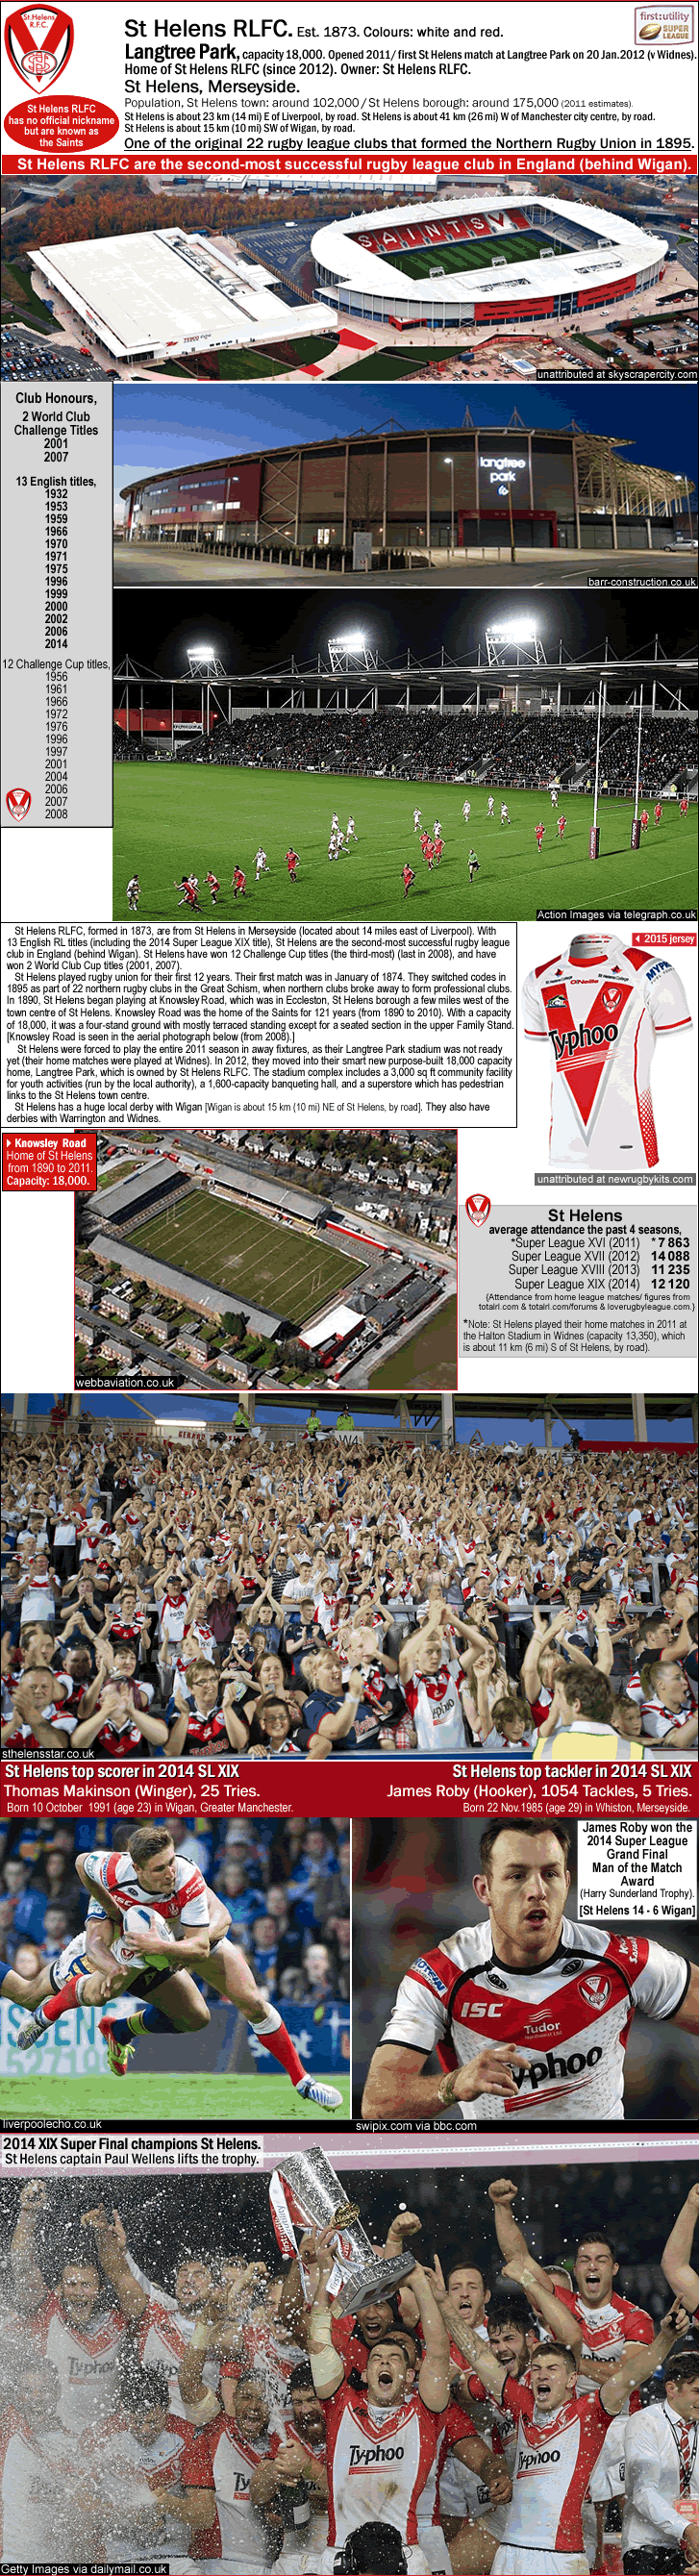 st-helens-rlfc_langtree-park_knowsley-road_t-makinson_j-roby_2014super-league_xix_champions_m_.gif